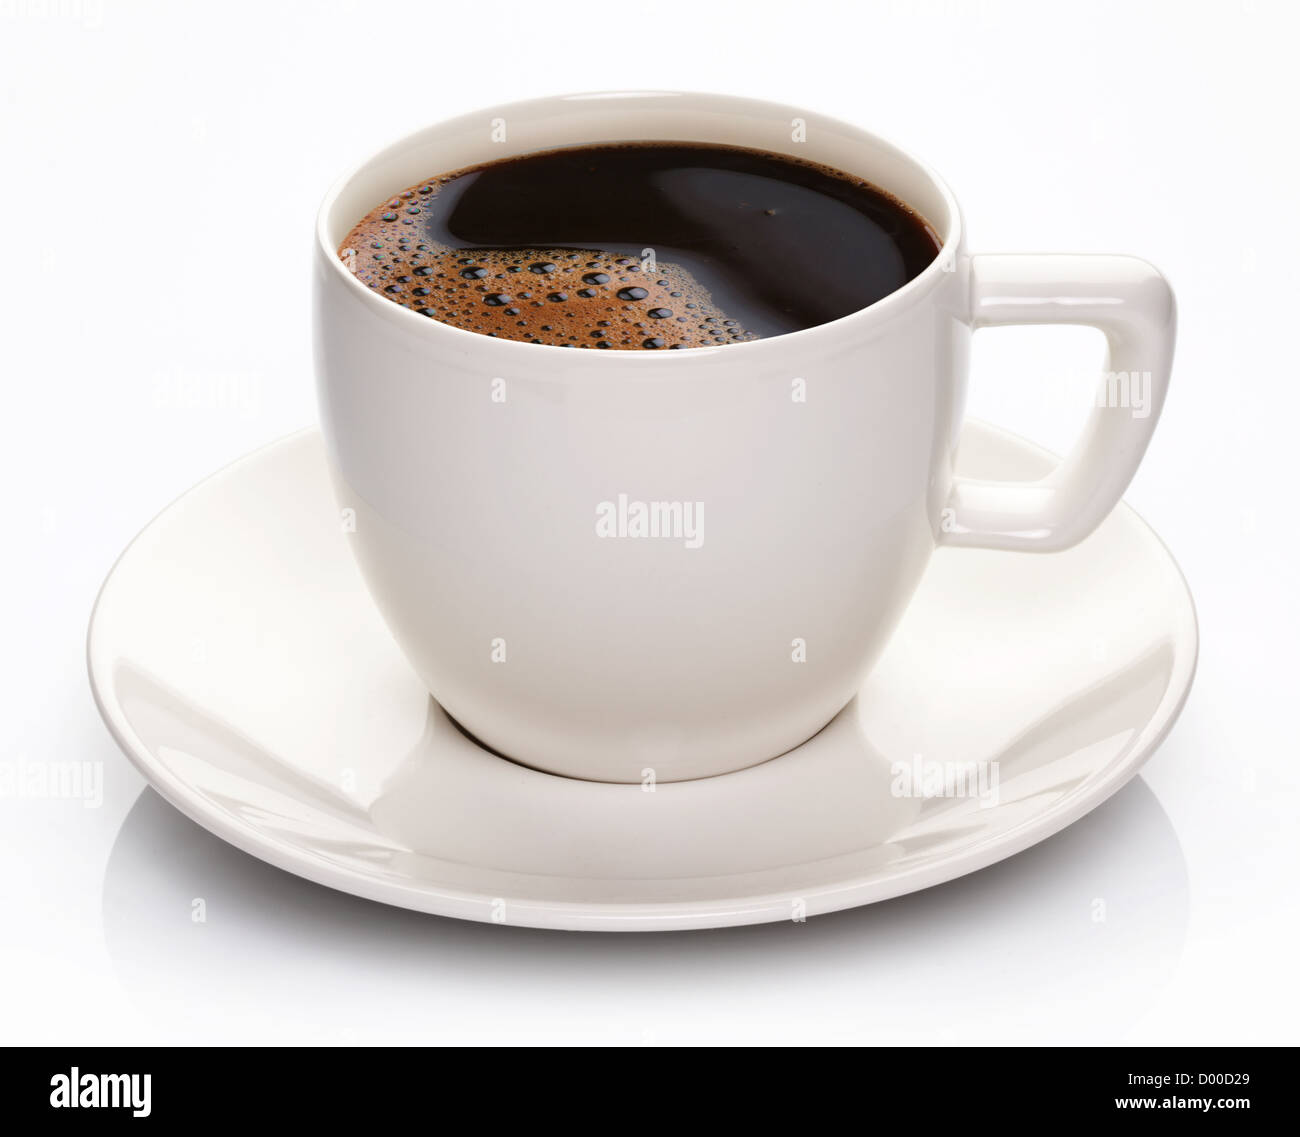 Coffee cup and saucer on a white background. Stock Photo